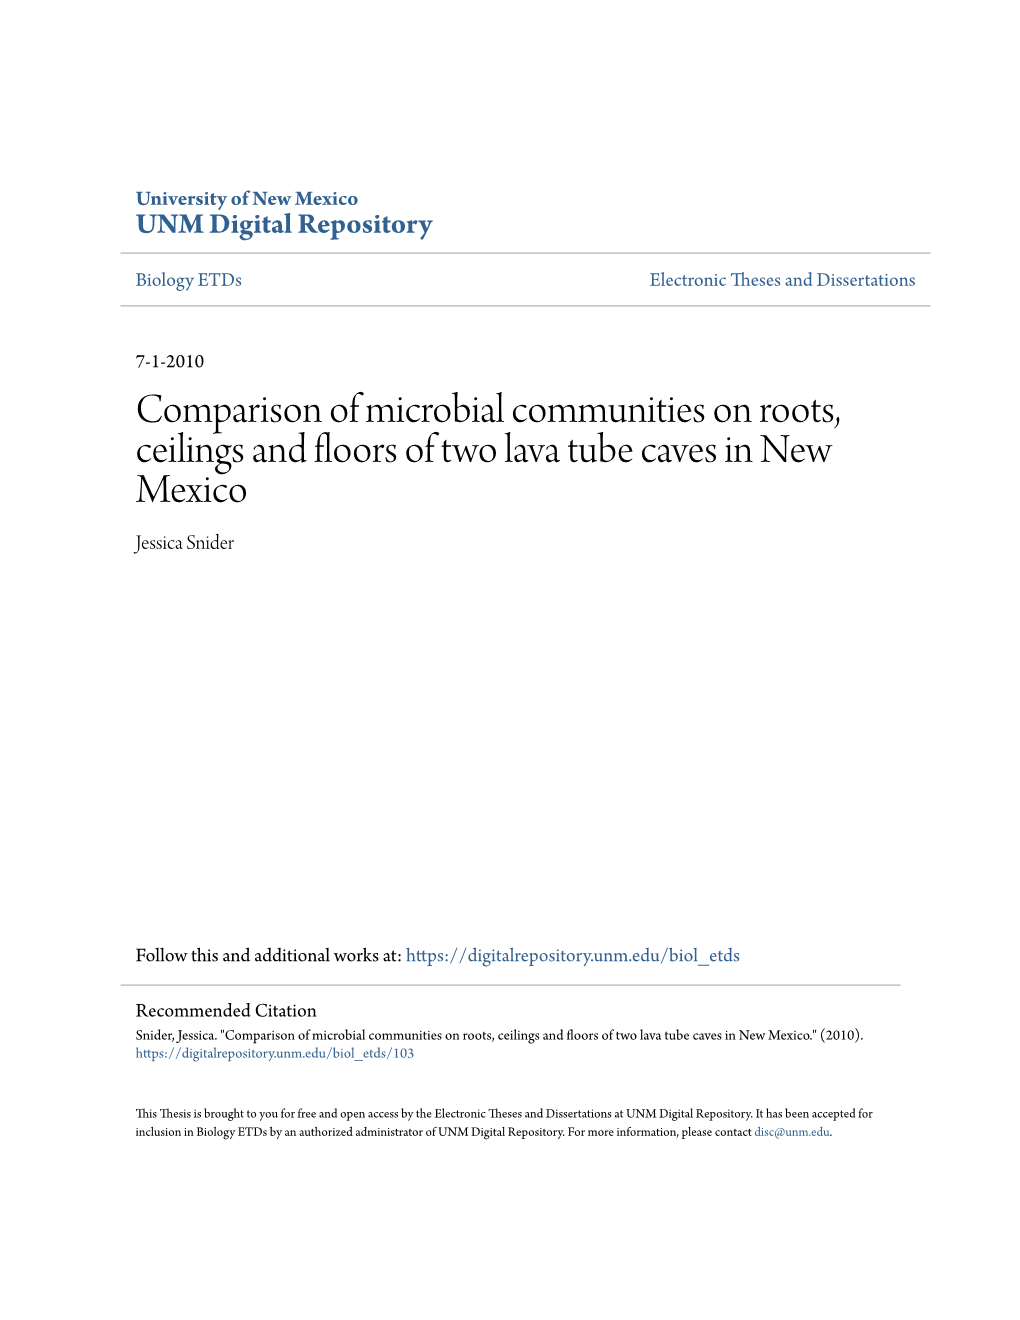 Comparison of Microbial Communities on Roots, Ceilings and Floors of Two Lava Tube Caves in New Mexico Jessica Snider